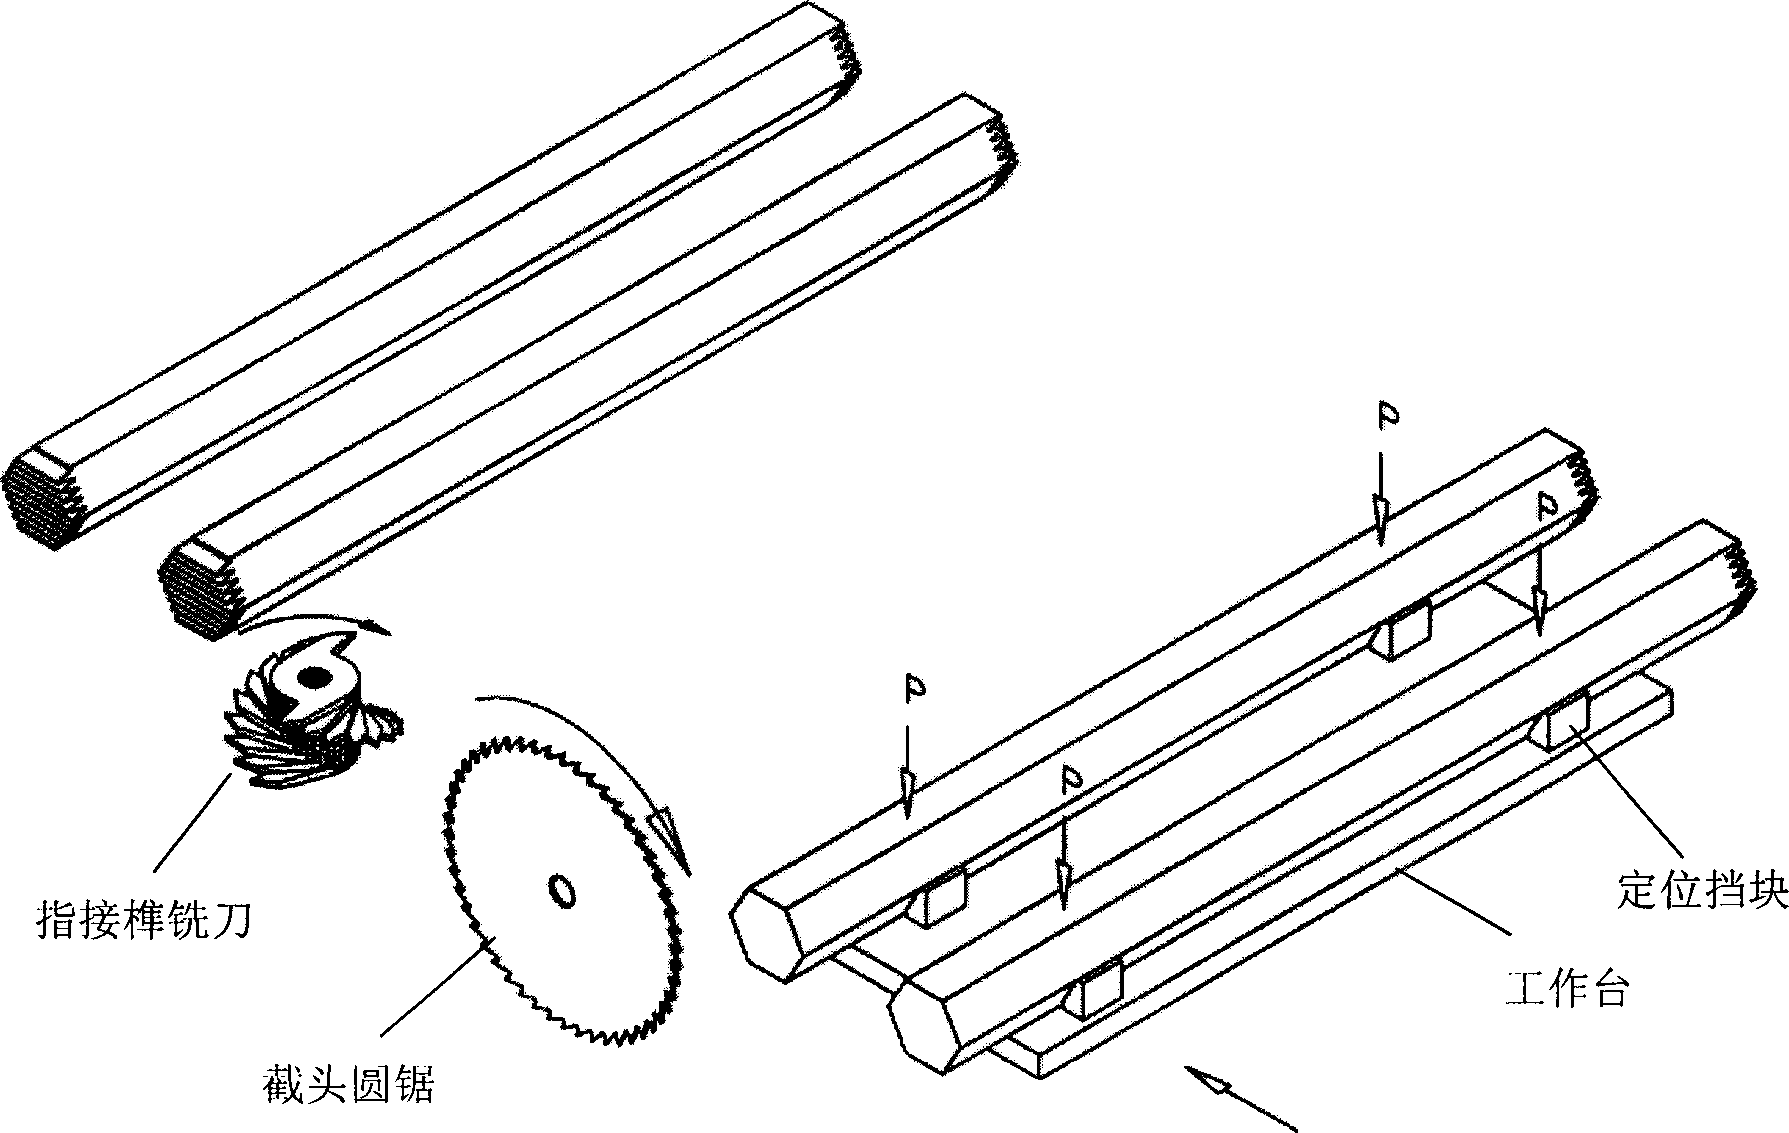 Method for preparing large-size sheet by using small-diameter wood